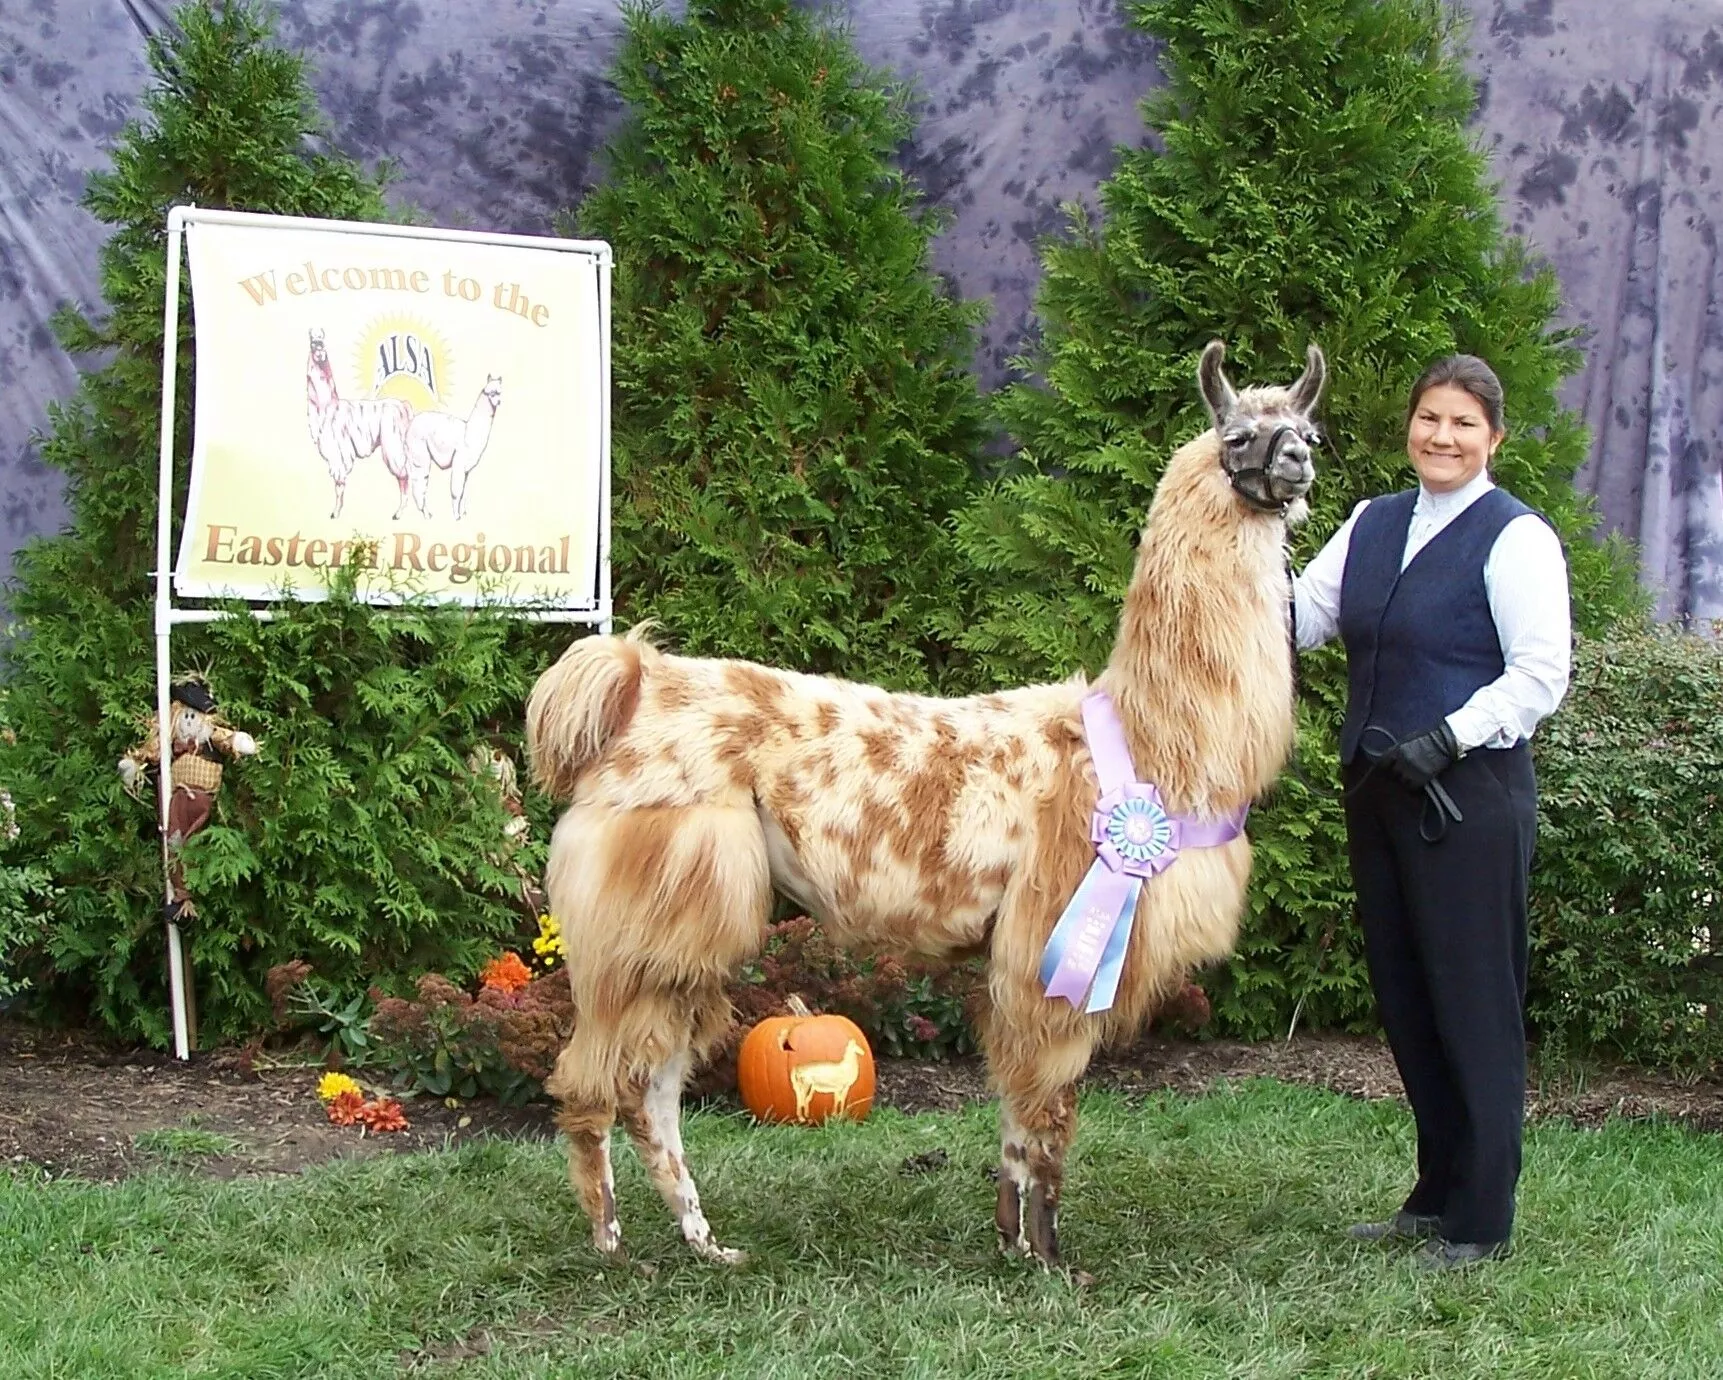 An image of a llama named Appy Strudel with Paige